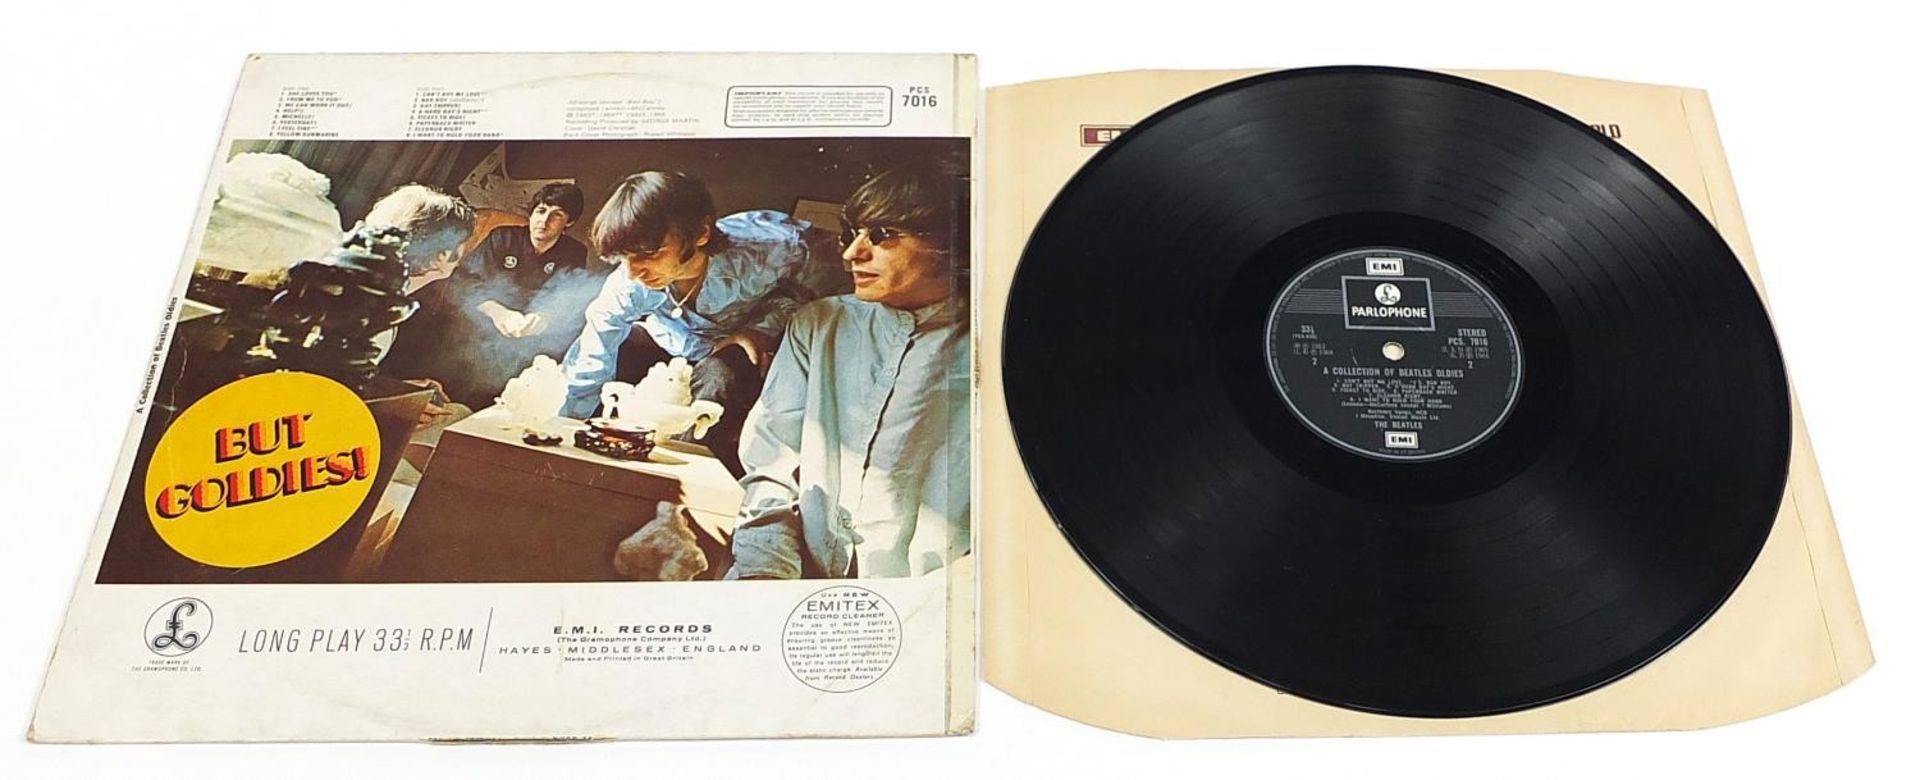 The Beatles, John Lennon & Yoko Ono vinyl LP records including Walls and Bridges with poster, - Image 35 of 41